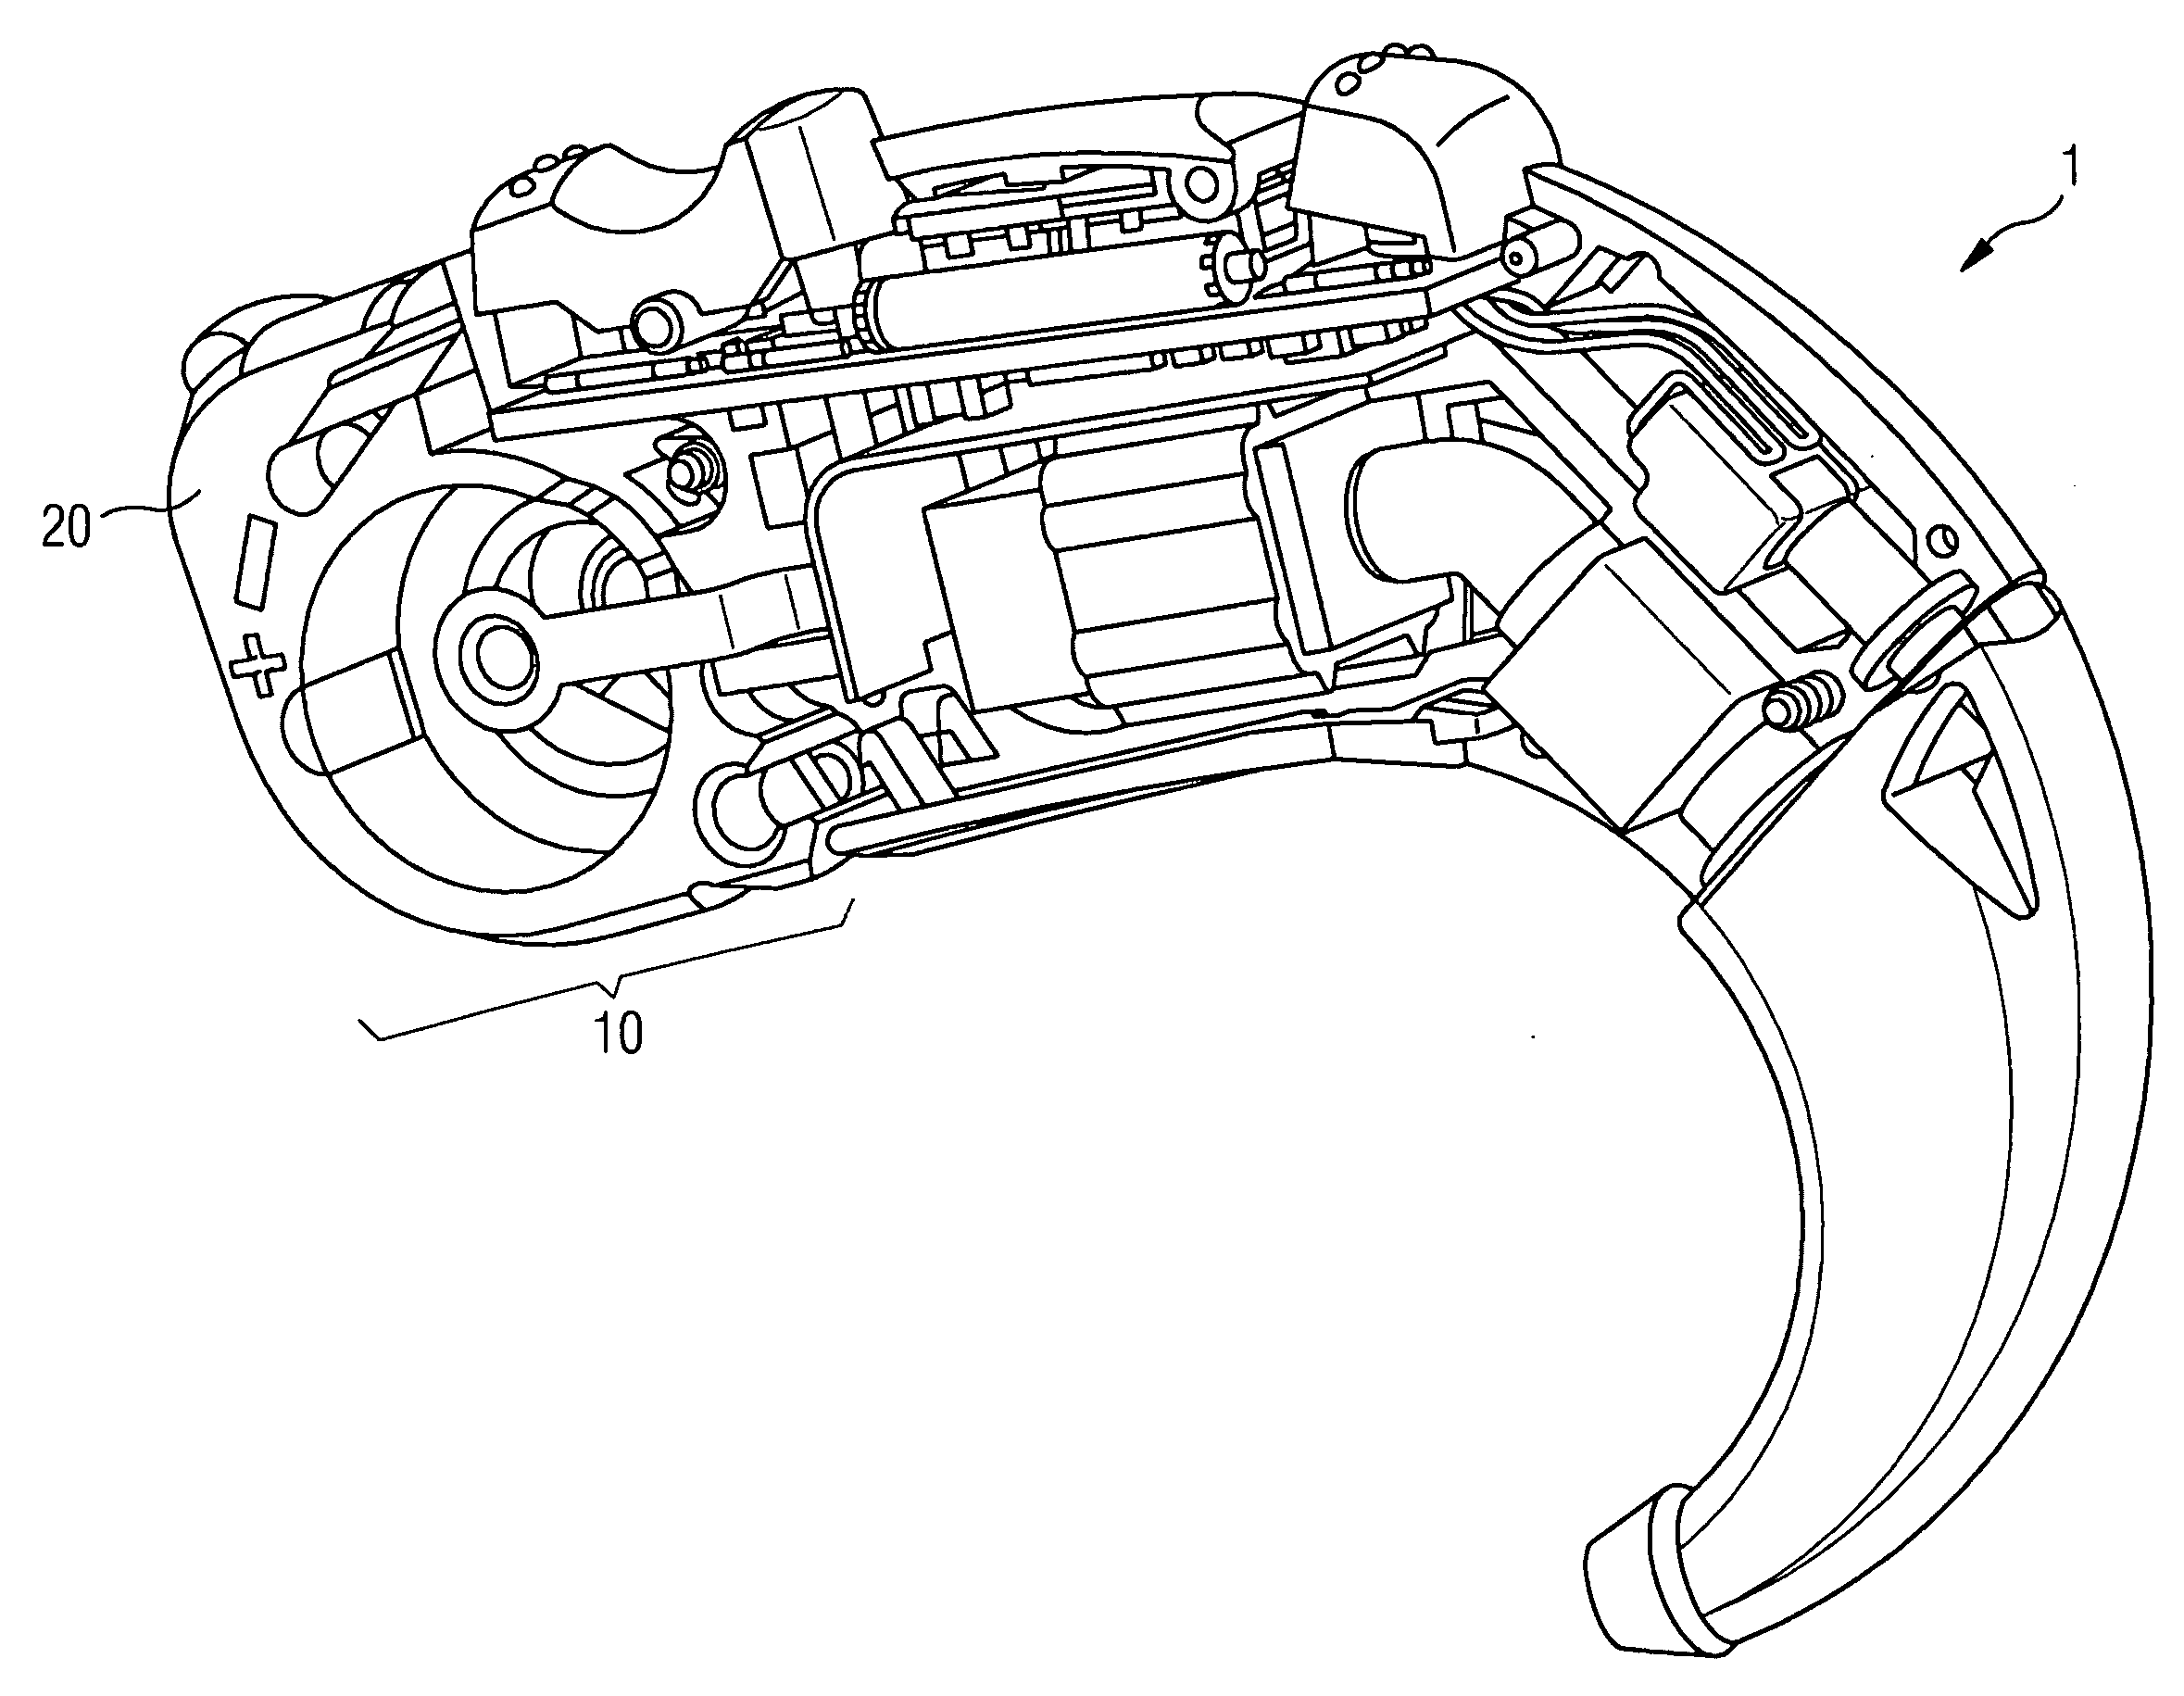 Hearing aid with a battery compartment